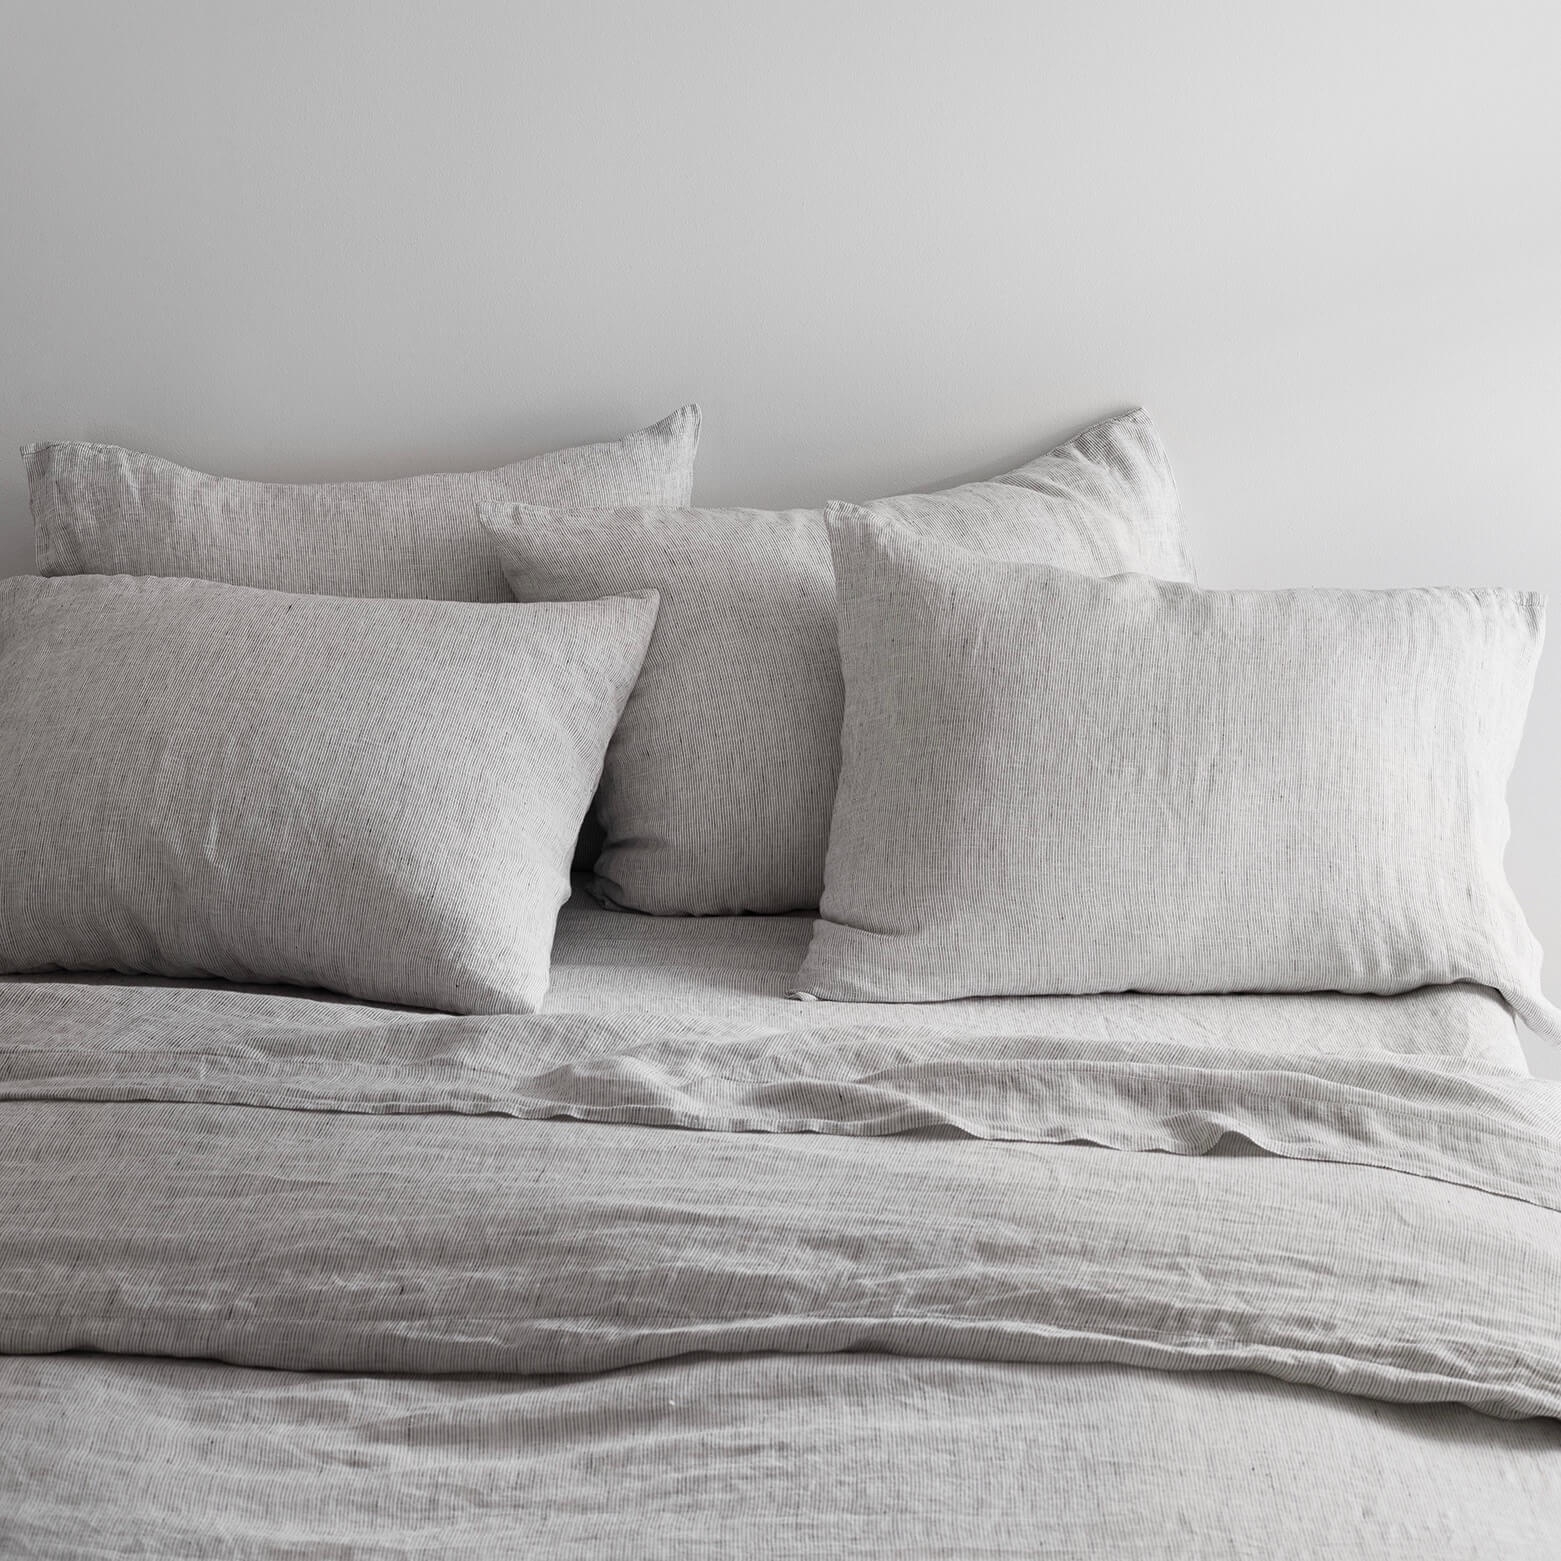 The Citizenry Stonewashed Linen Duvet Cover | Full/Queen | Duvet Only | Sand - Image 3